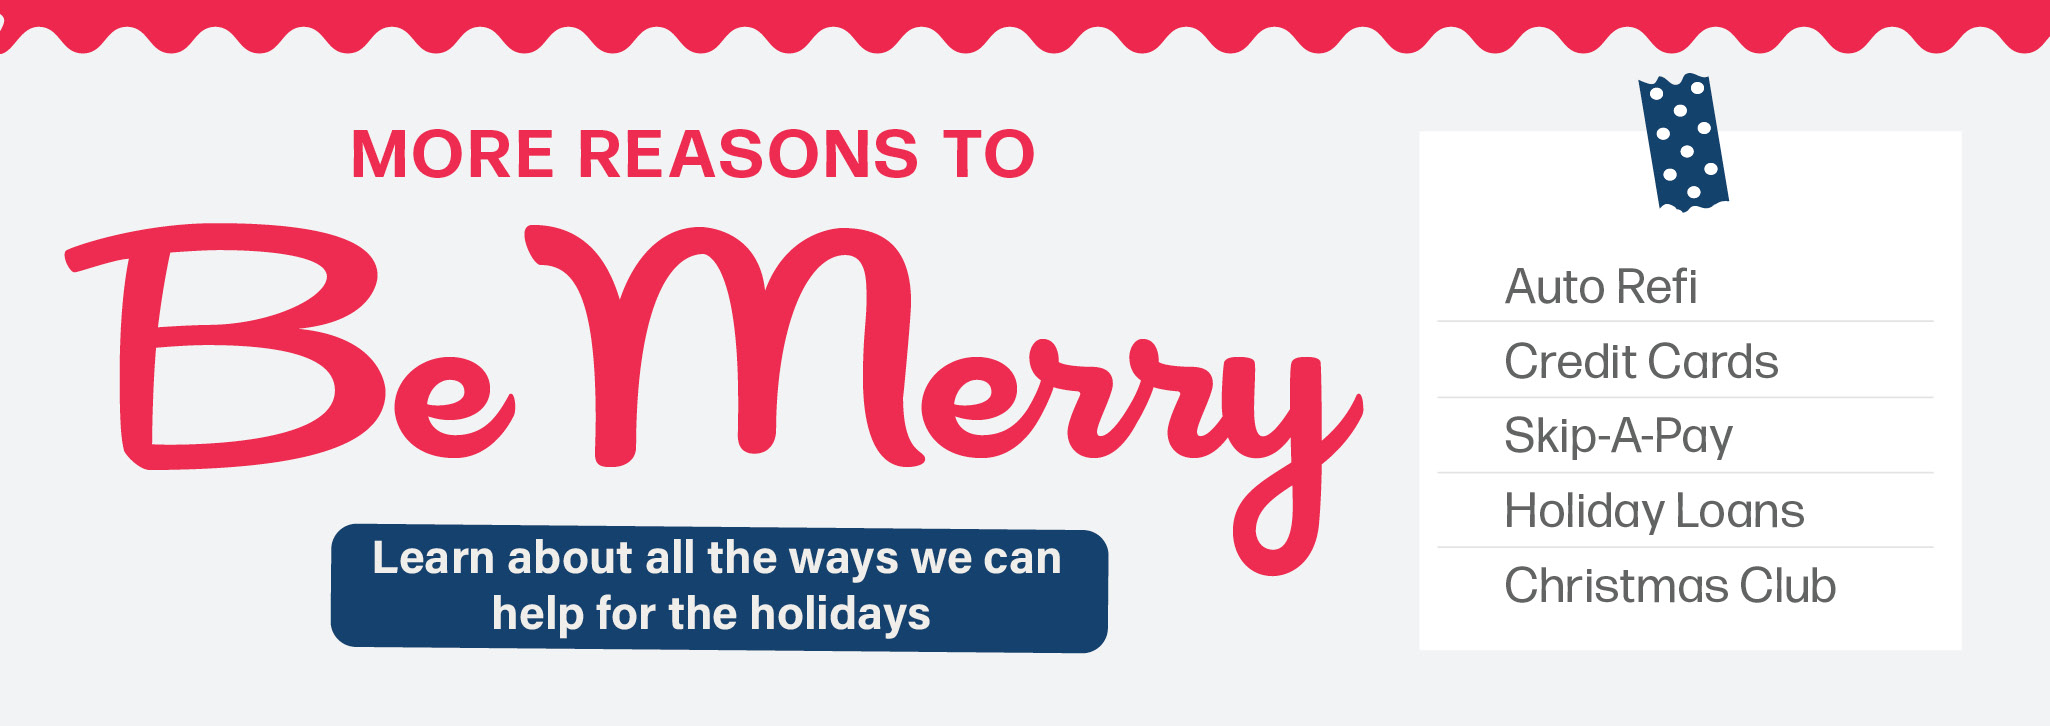 More reasons to be Merry. Learn more about ways to help with the holidays